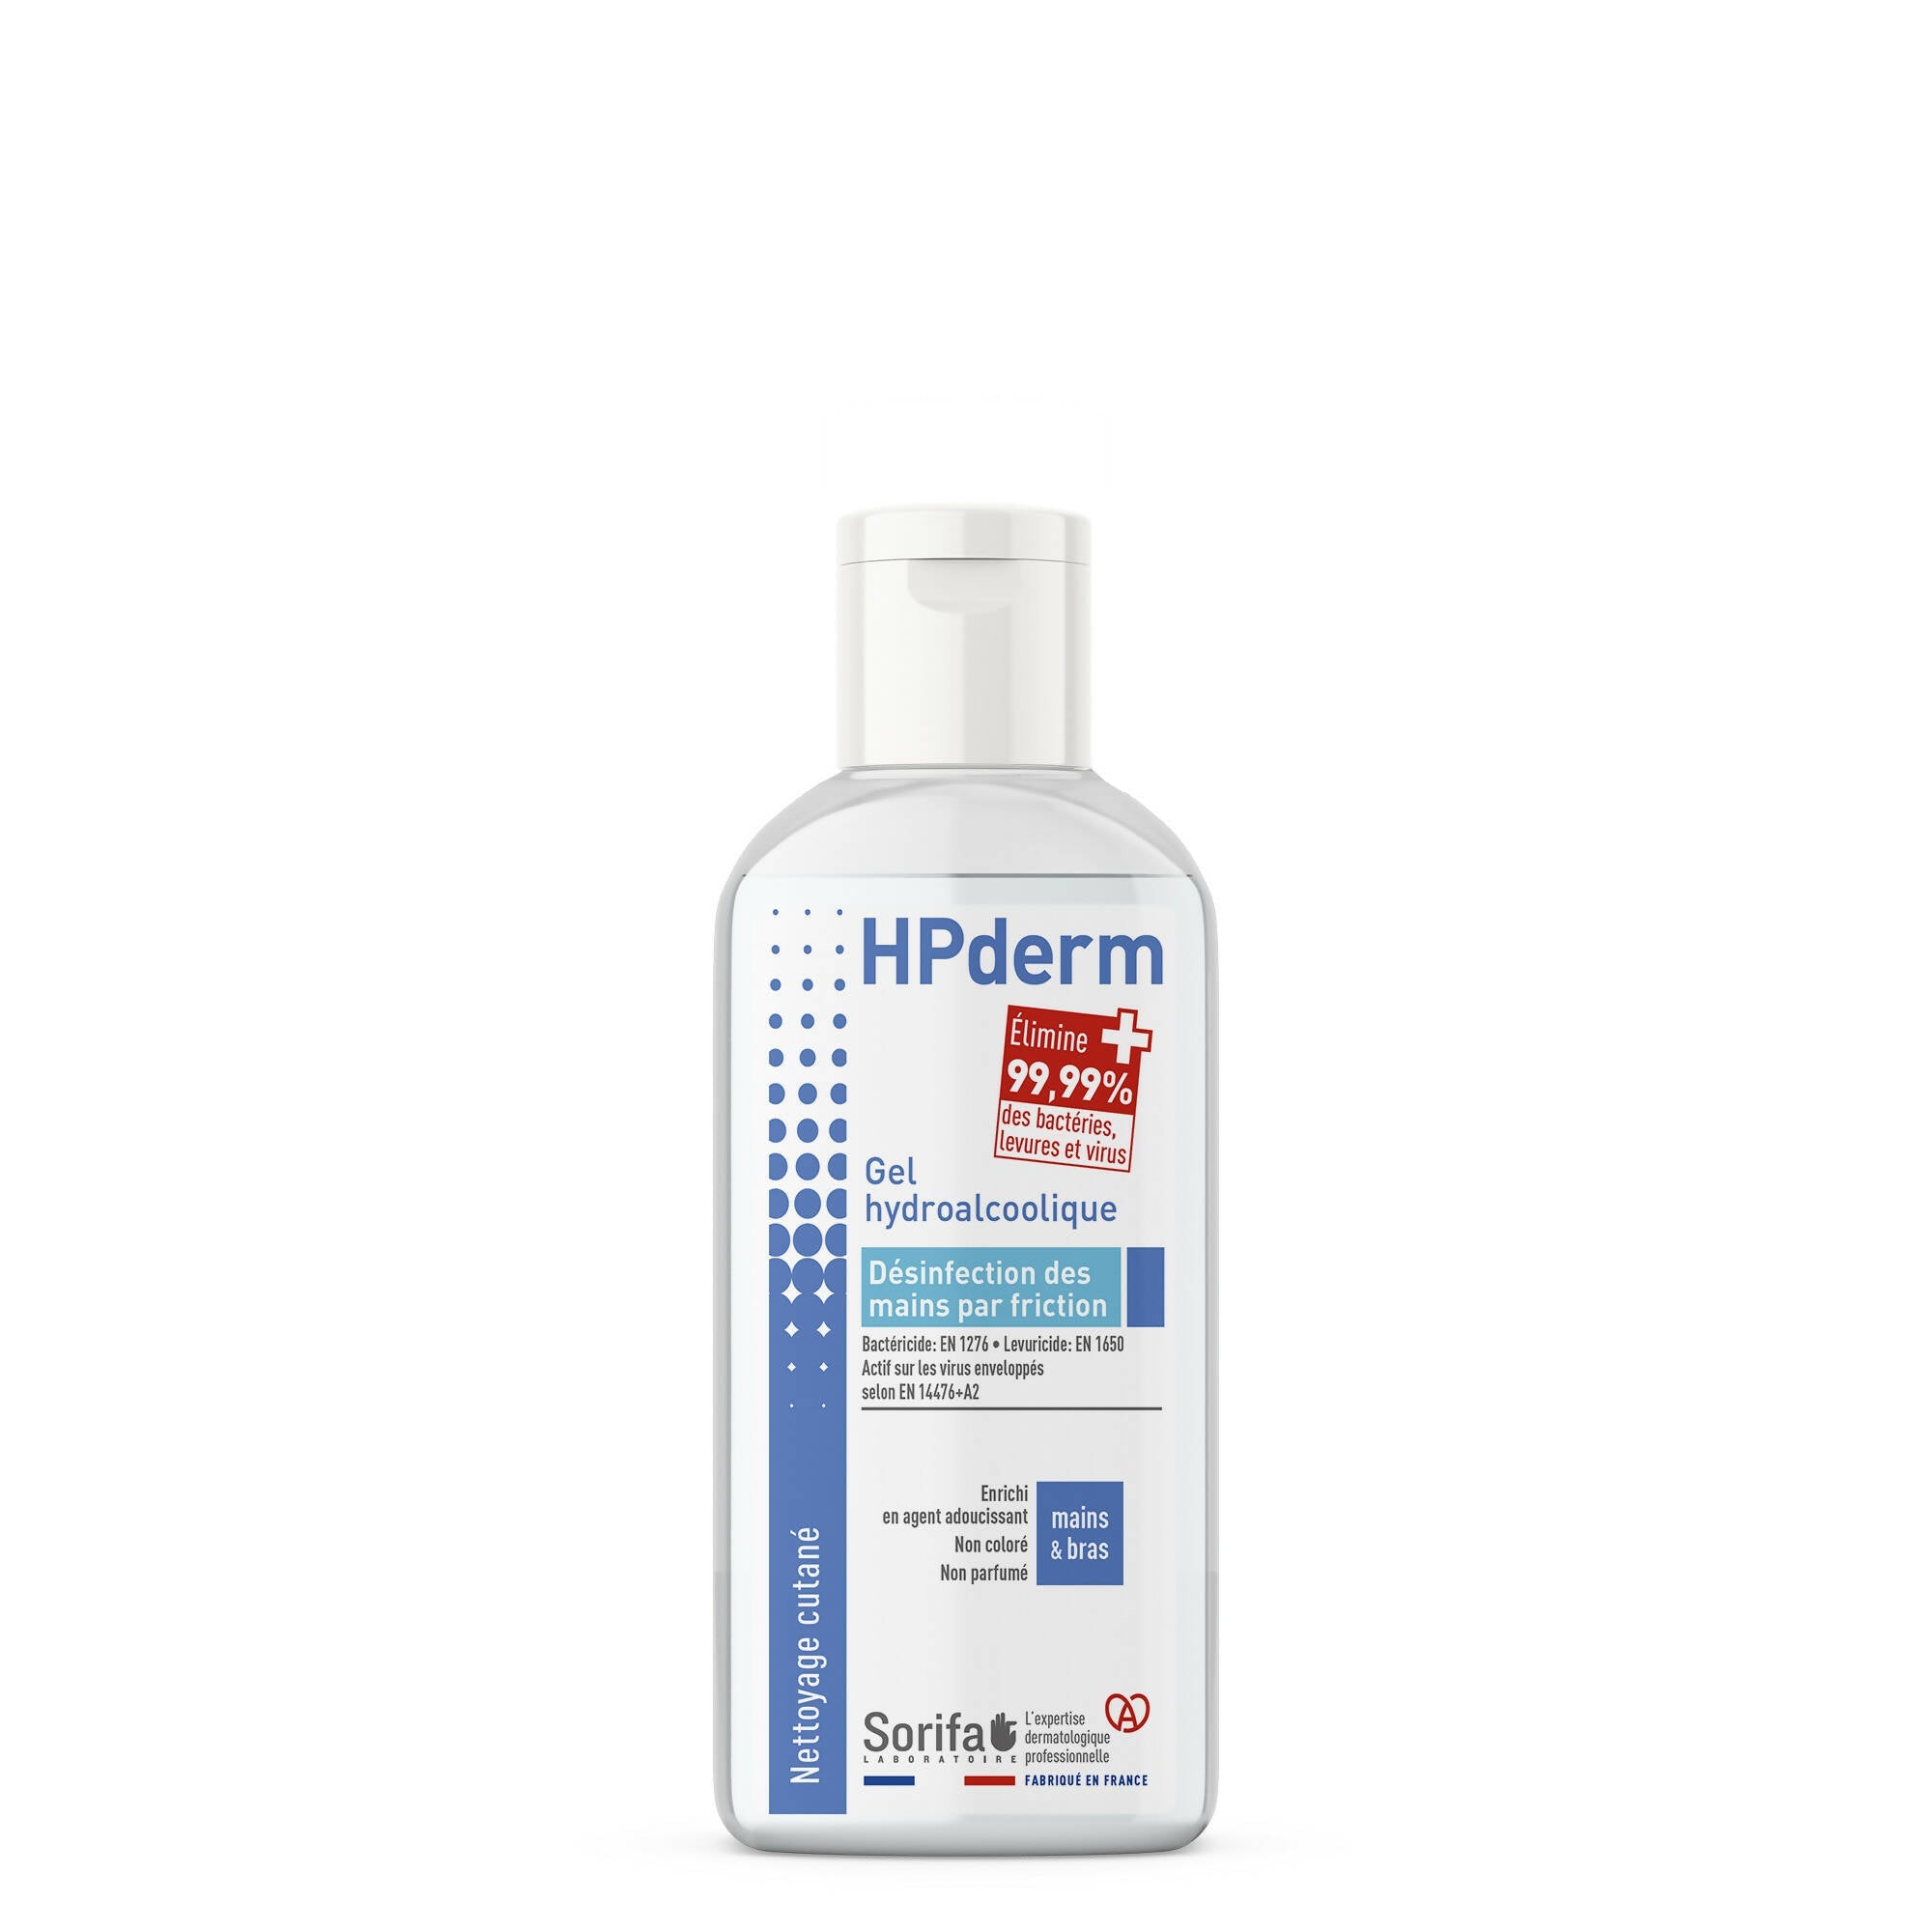 SORIFA - Complete box of 45 - HPderm Hydroalcoholic gel for hand disinfection - 100 ml bottle - 0